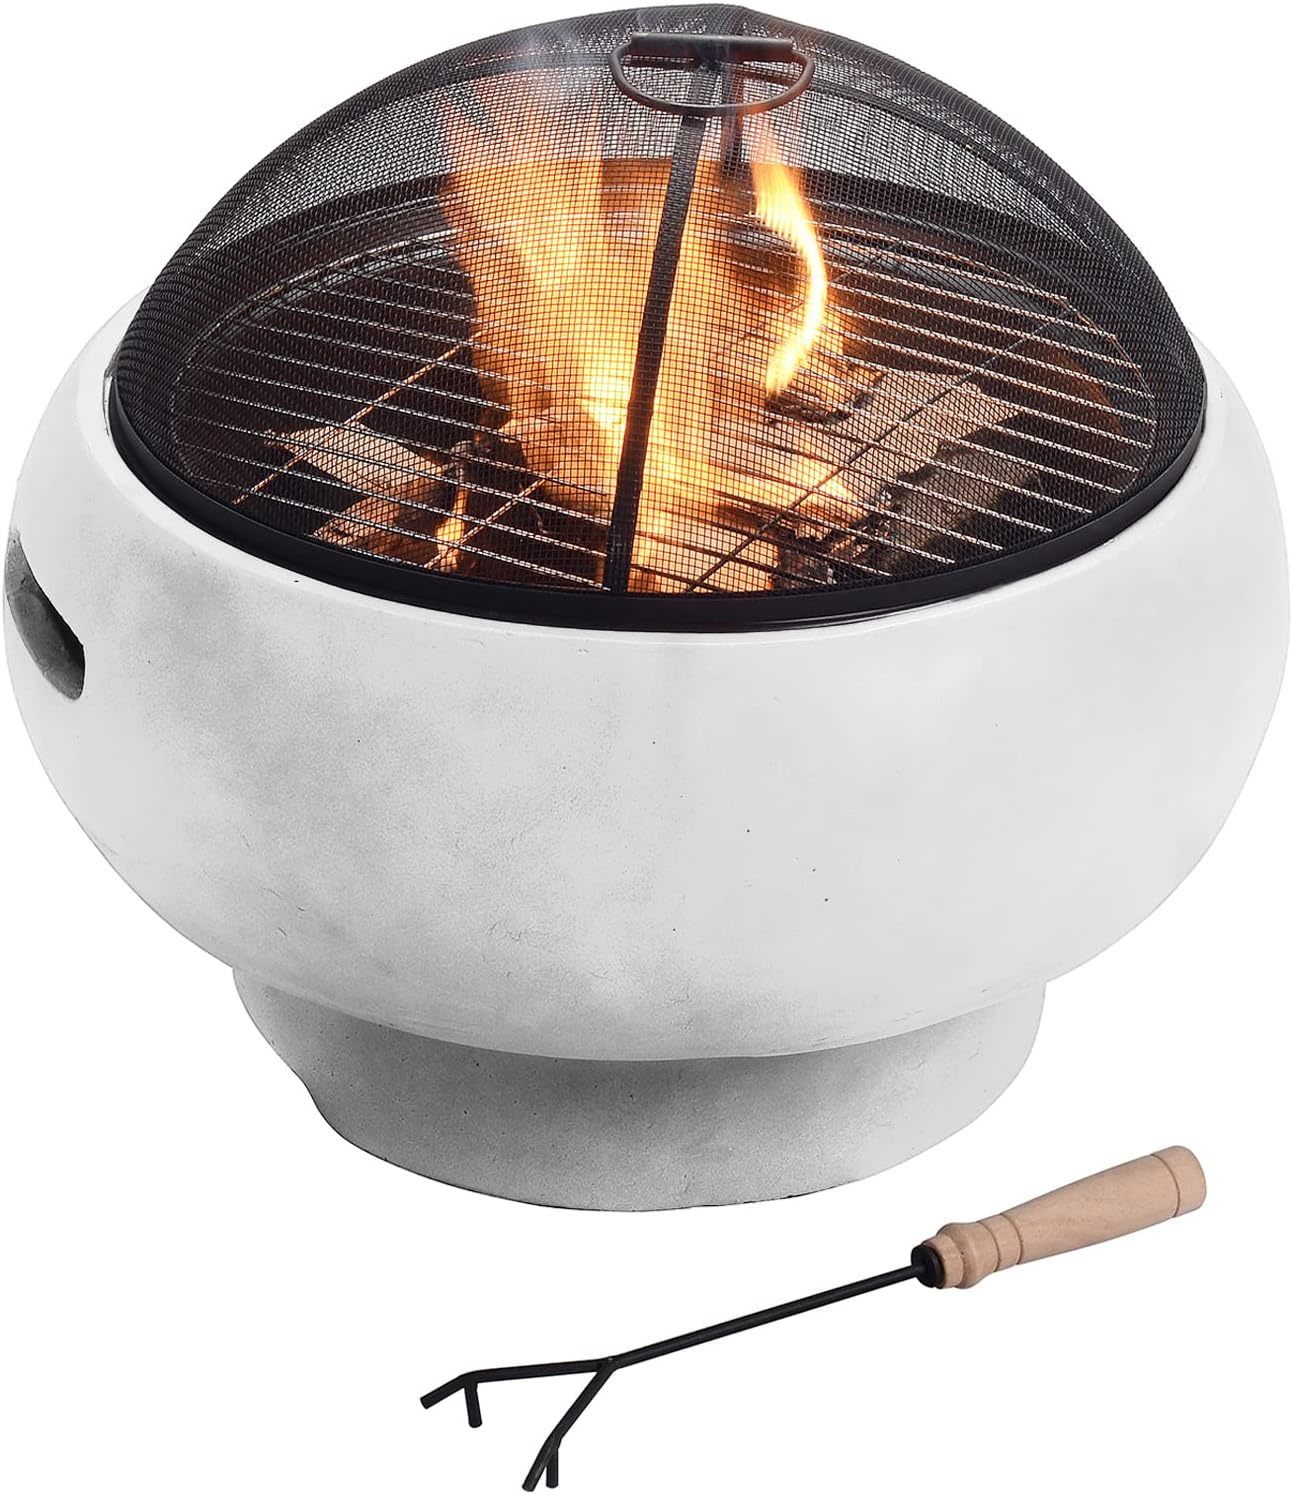 Teamson Home Mgo Light Gray Concrete Round Charcoal And Wood Burning Fire Pit - $141.95